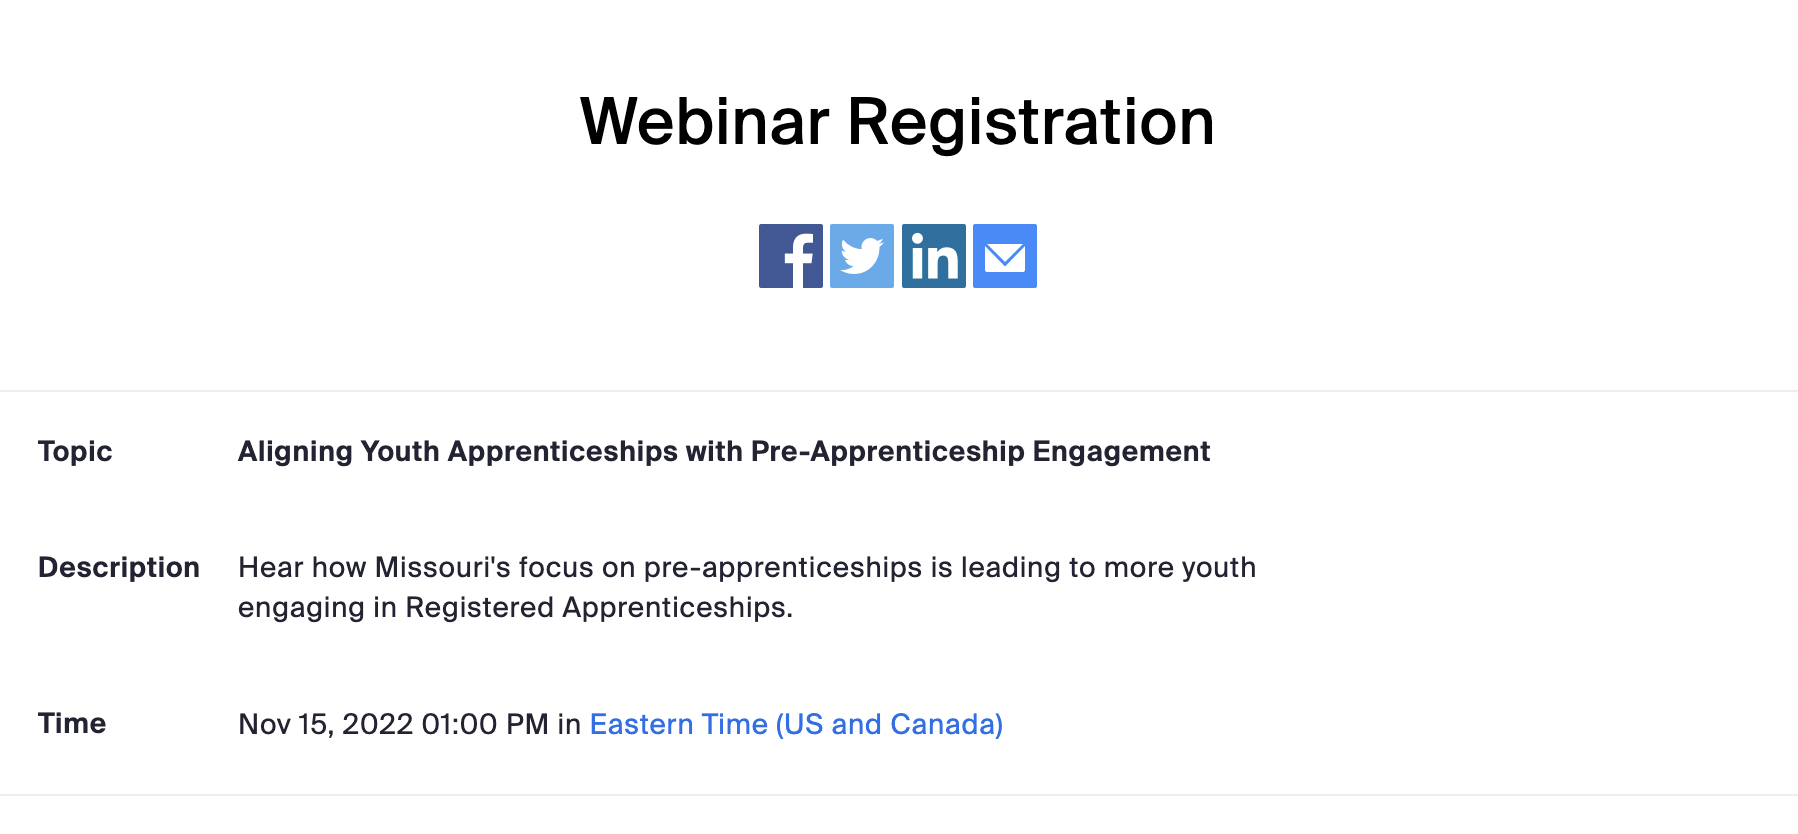 Promising Practices - Aligning Youth Apprenticeships with Pre-Apprenticeship Engagement Webinar